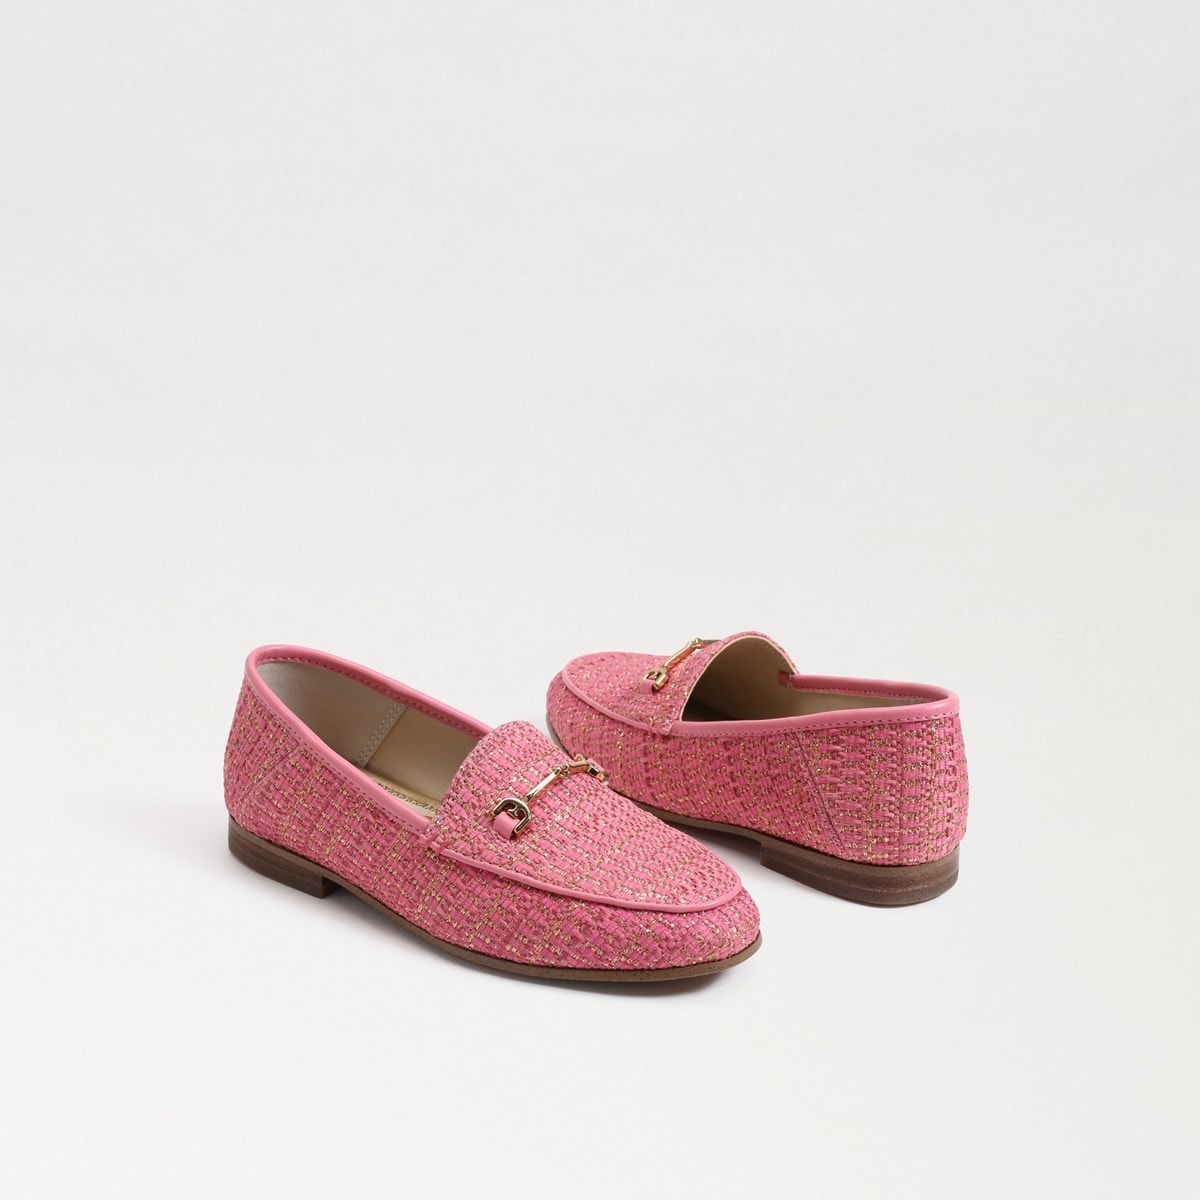 Sam Edelman Loraine Kids Bit Loafer | Girls' Flats and Loafers